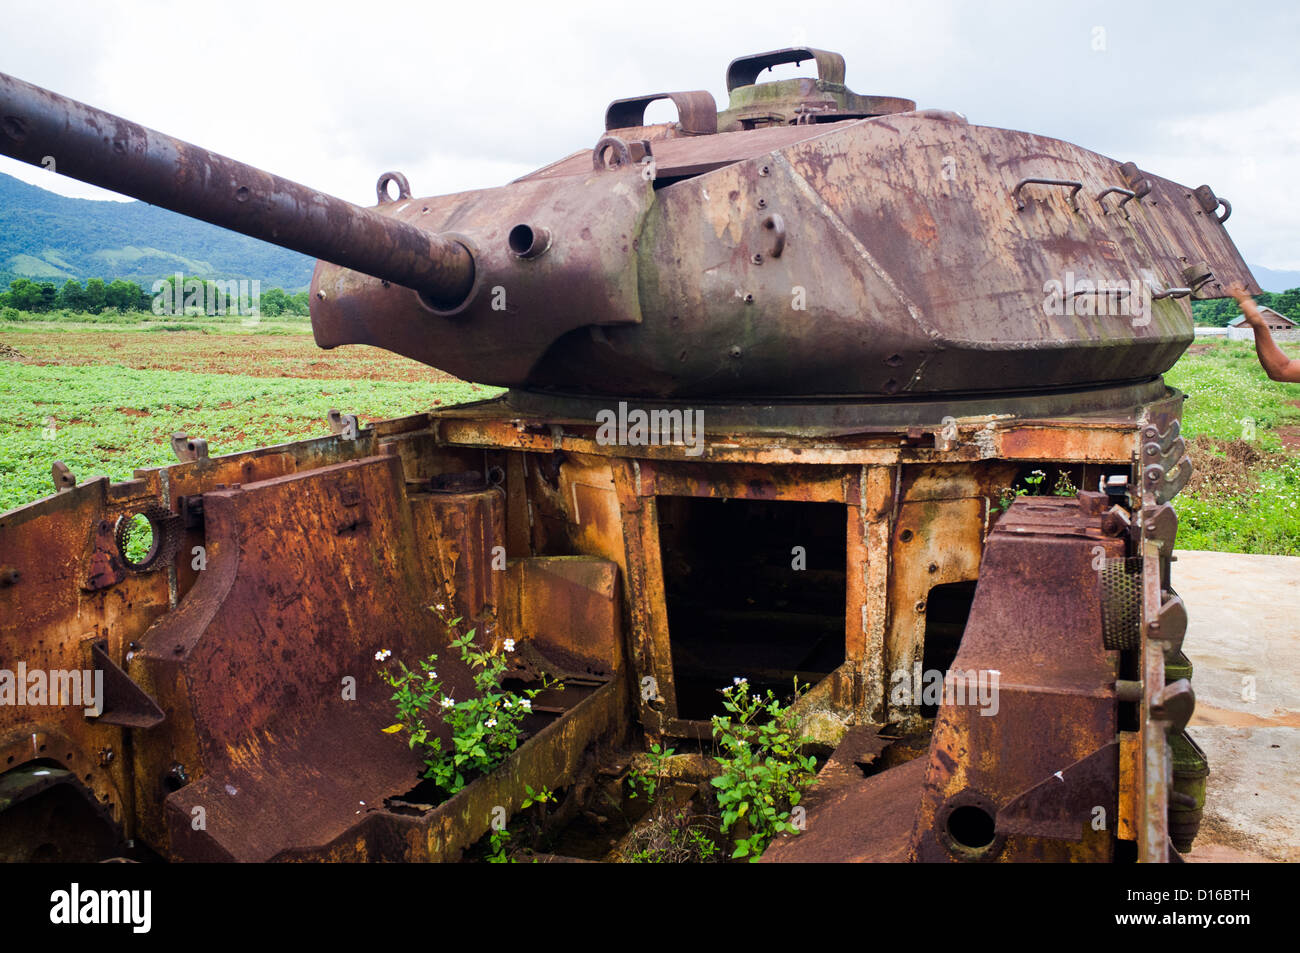 American tank remains at Khe Sanh Airbase in the DMZ zone in Vietnam Stock Photo